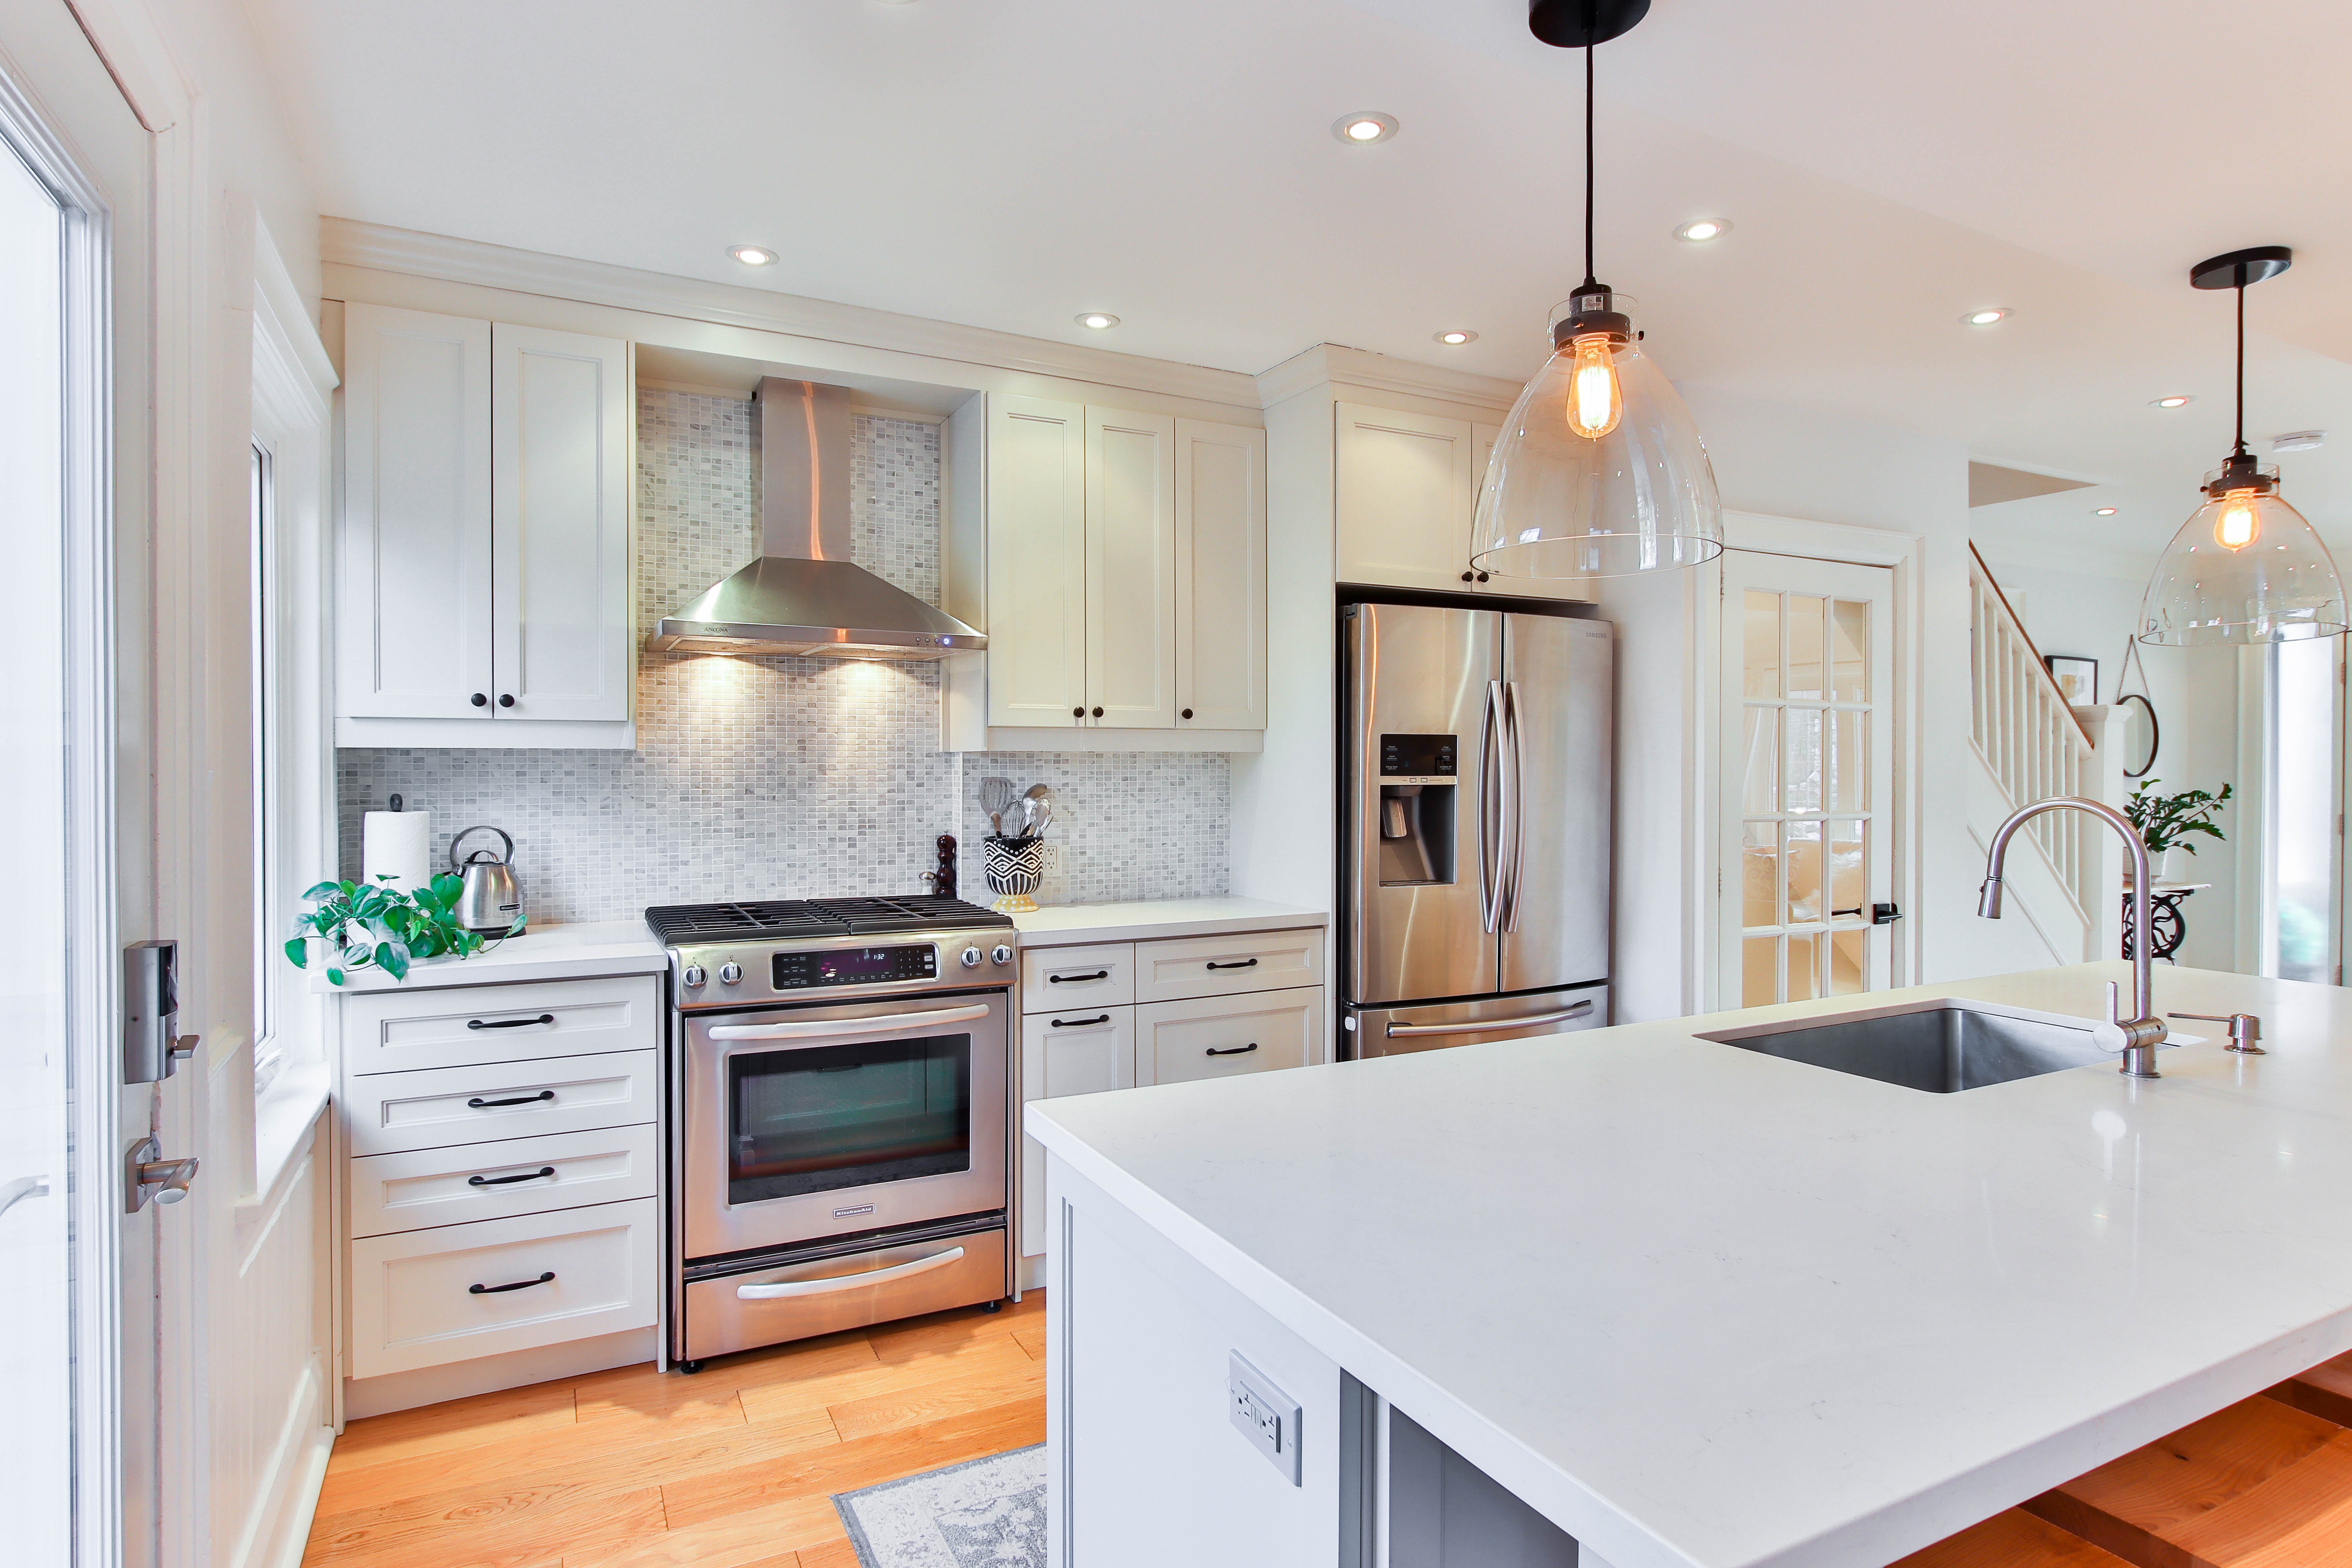 Large and bright kitchen with white countertops and cabinets as an example of how to bring style to your kitchen